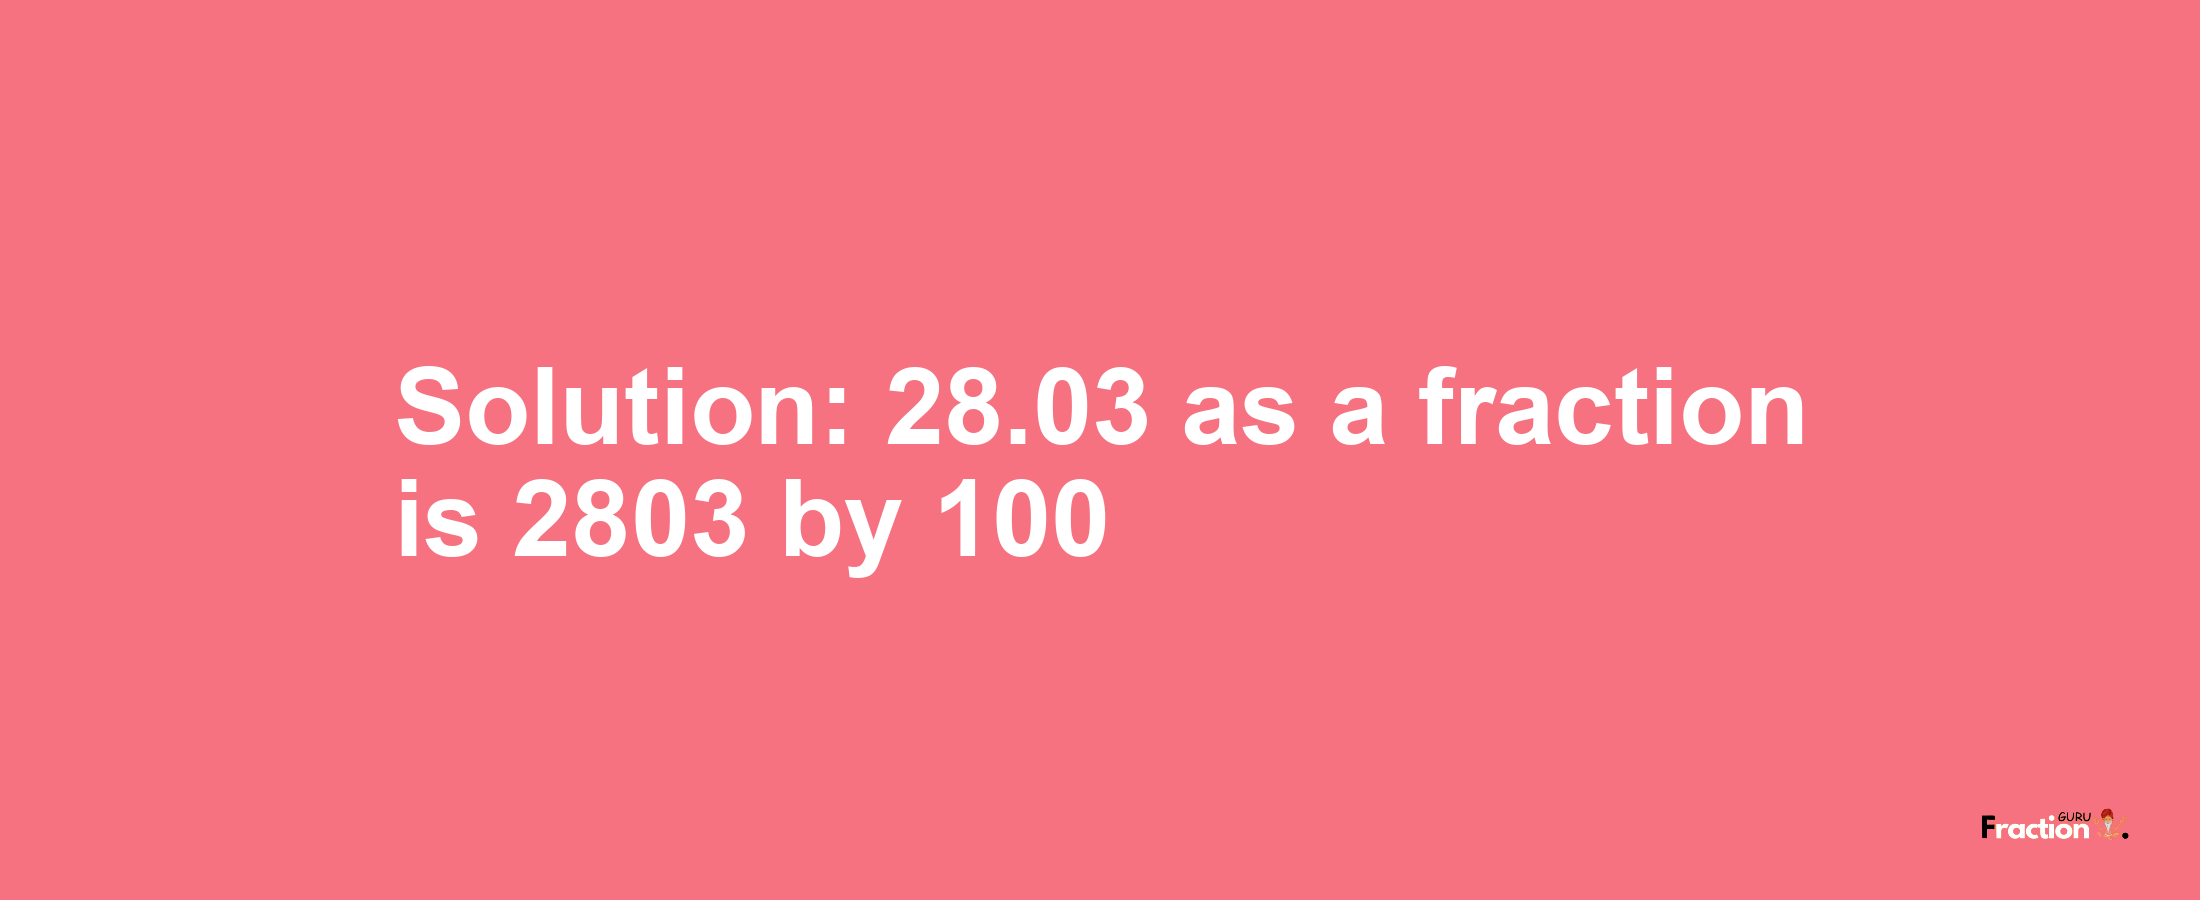 Solution:28.03 as a fraction is 2803/100